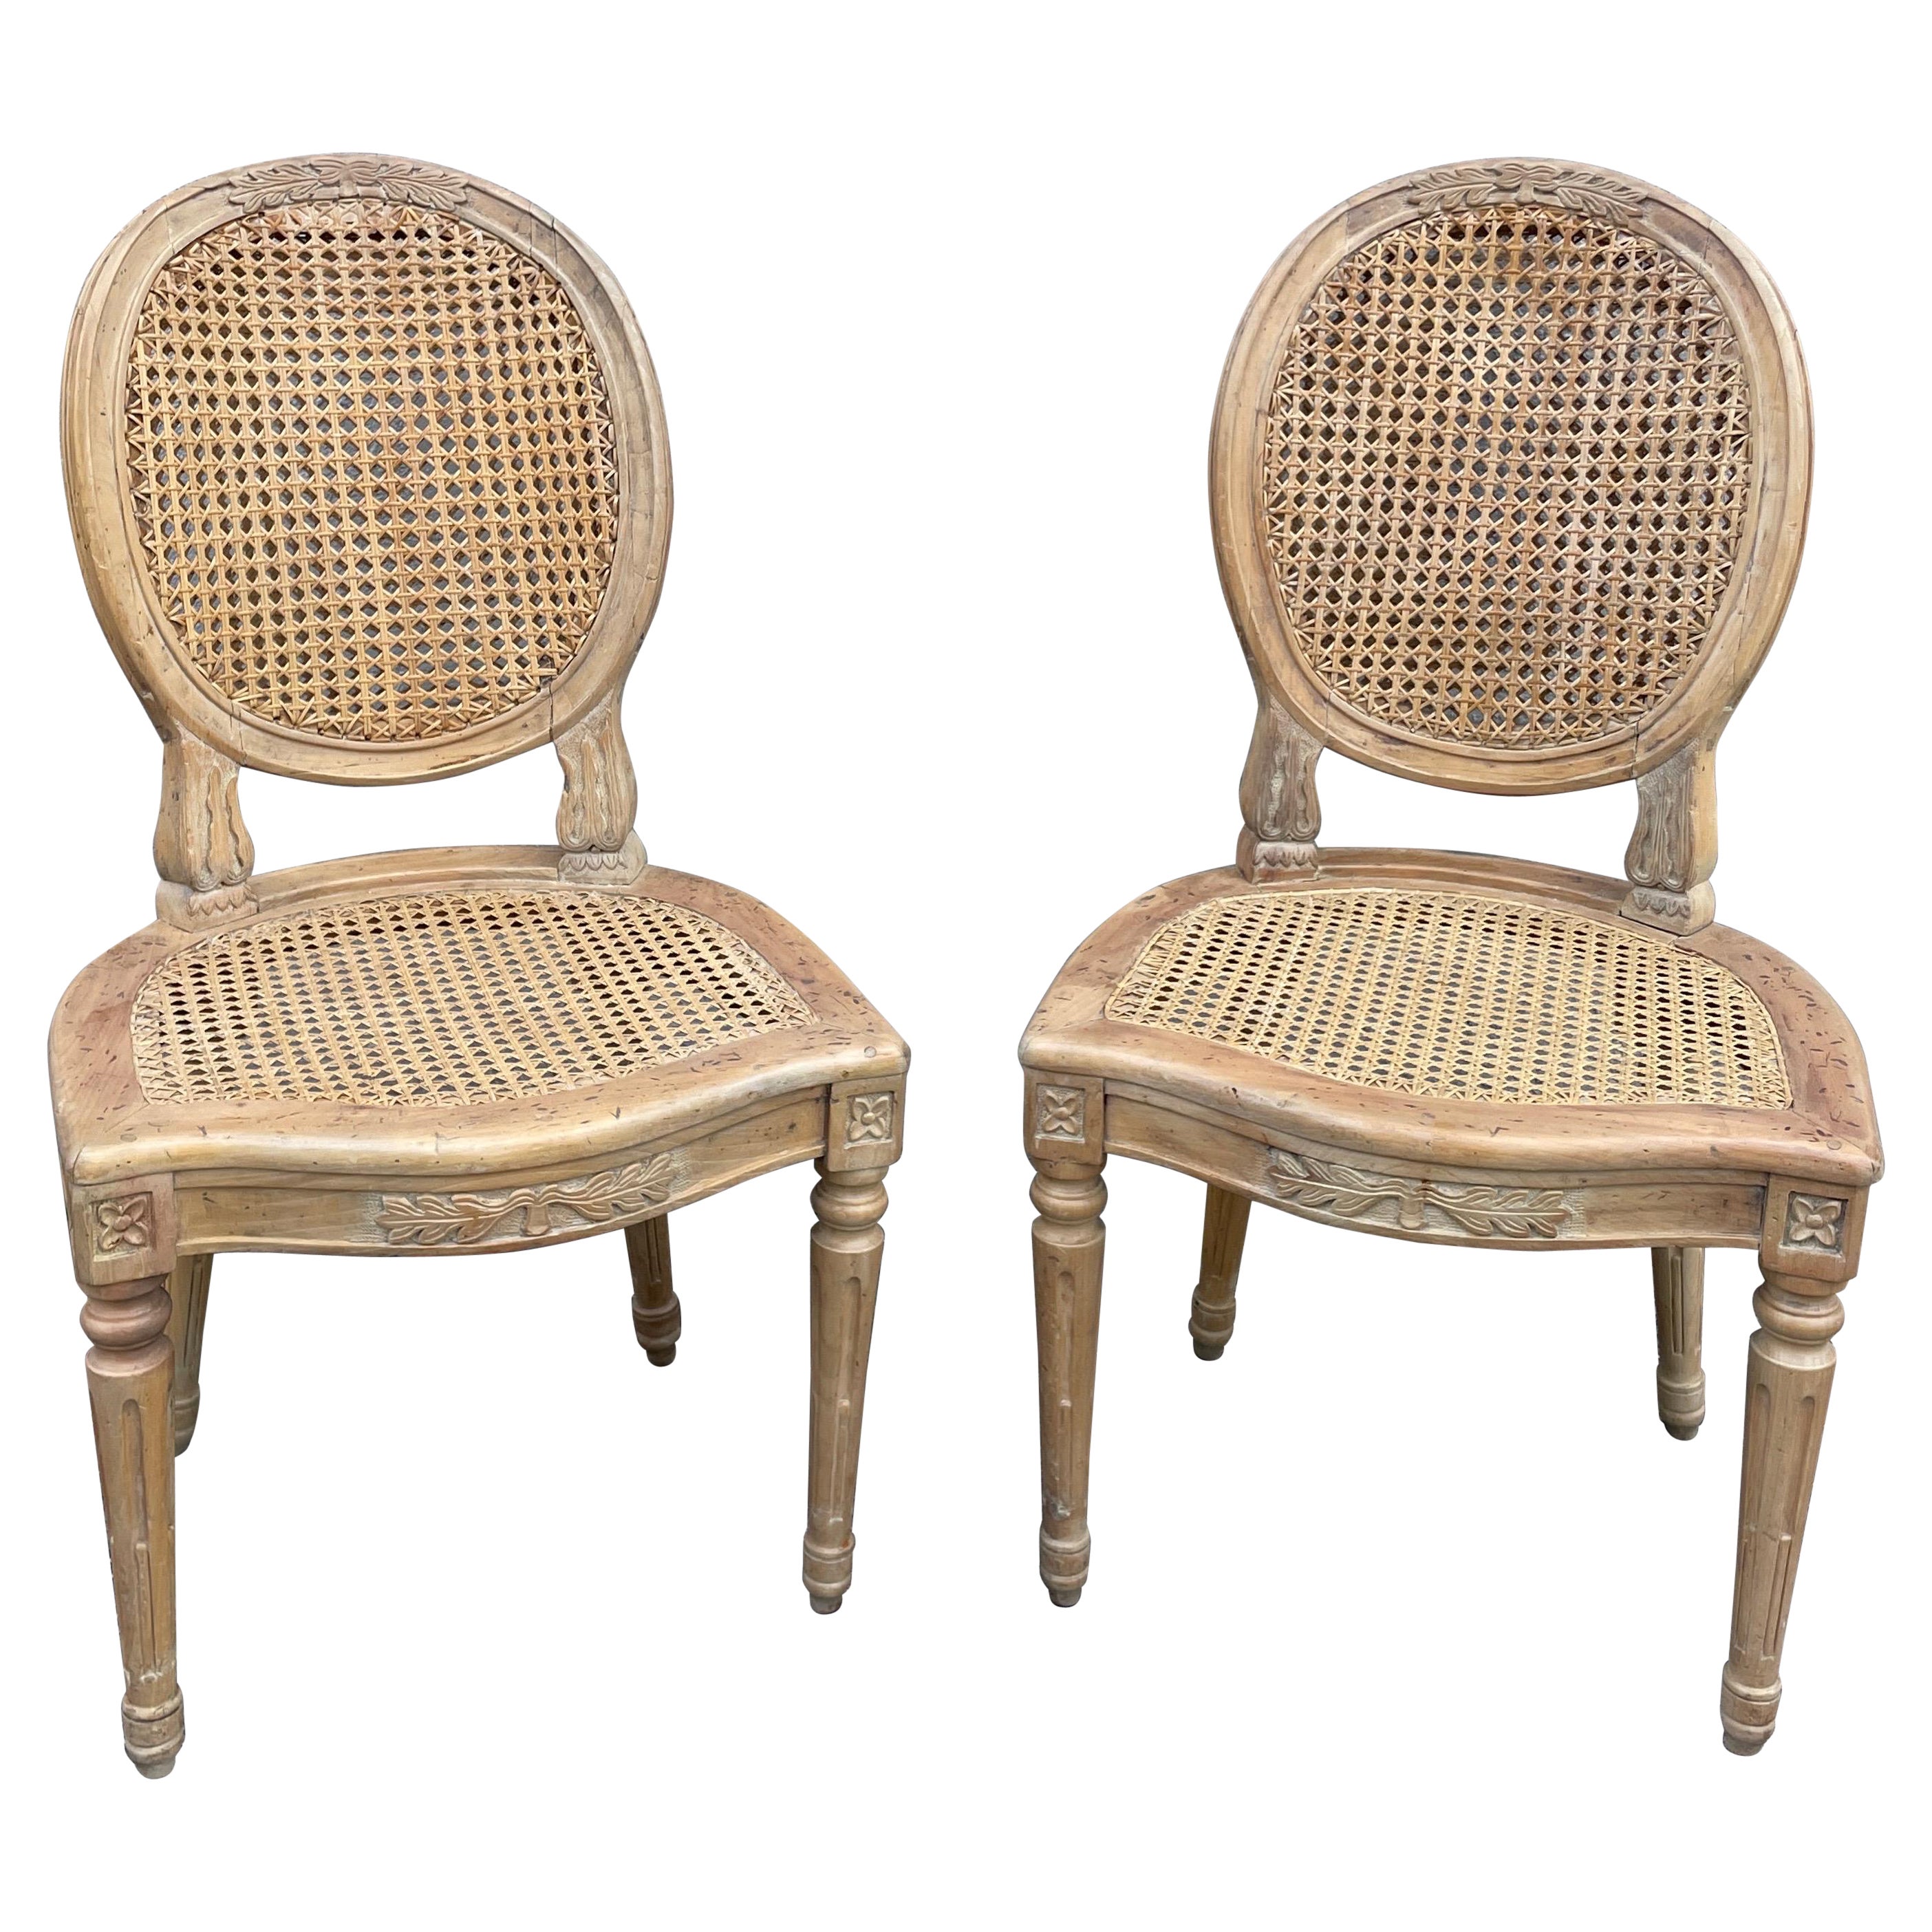 Pair of Louis XVI Style Caned Side Chairs